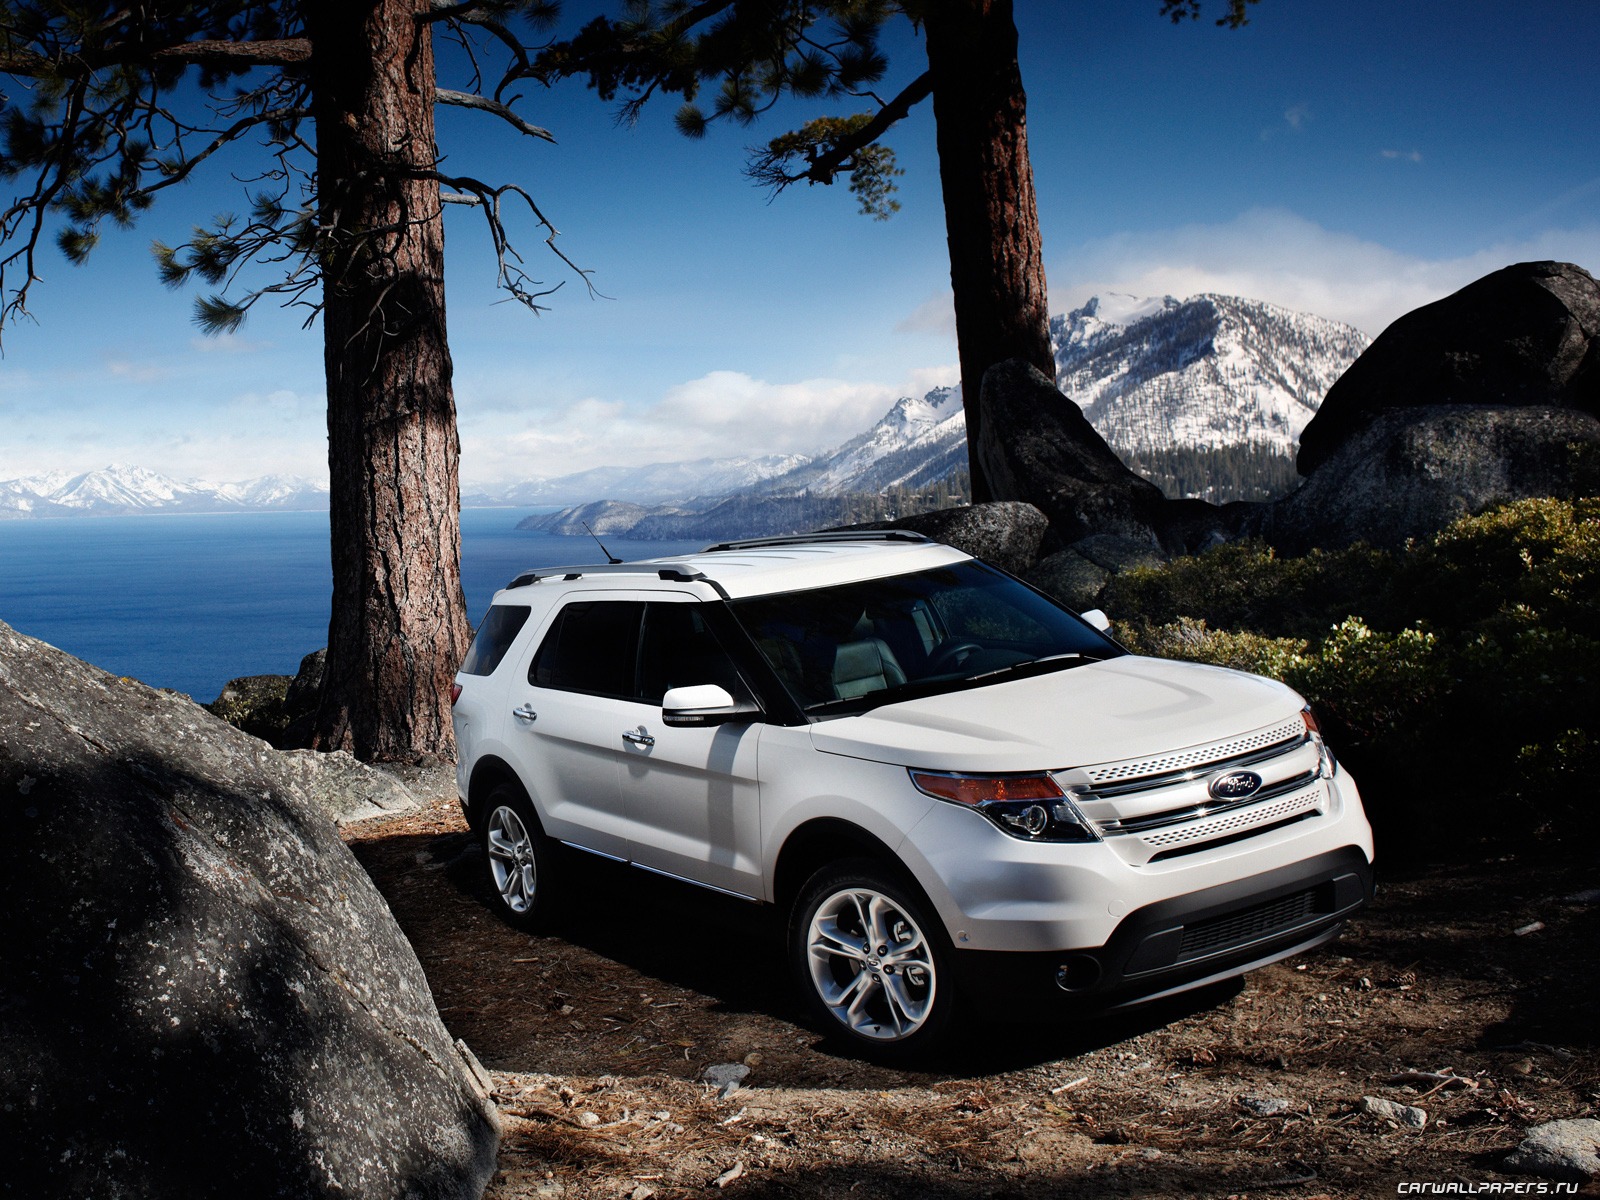 Ford Explorer Limited - 2011 福特 #11 - 1600x1200